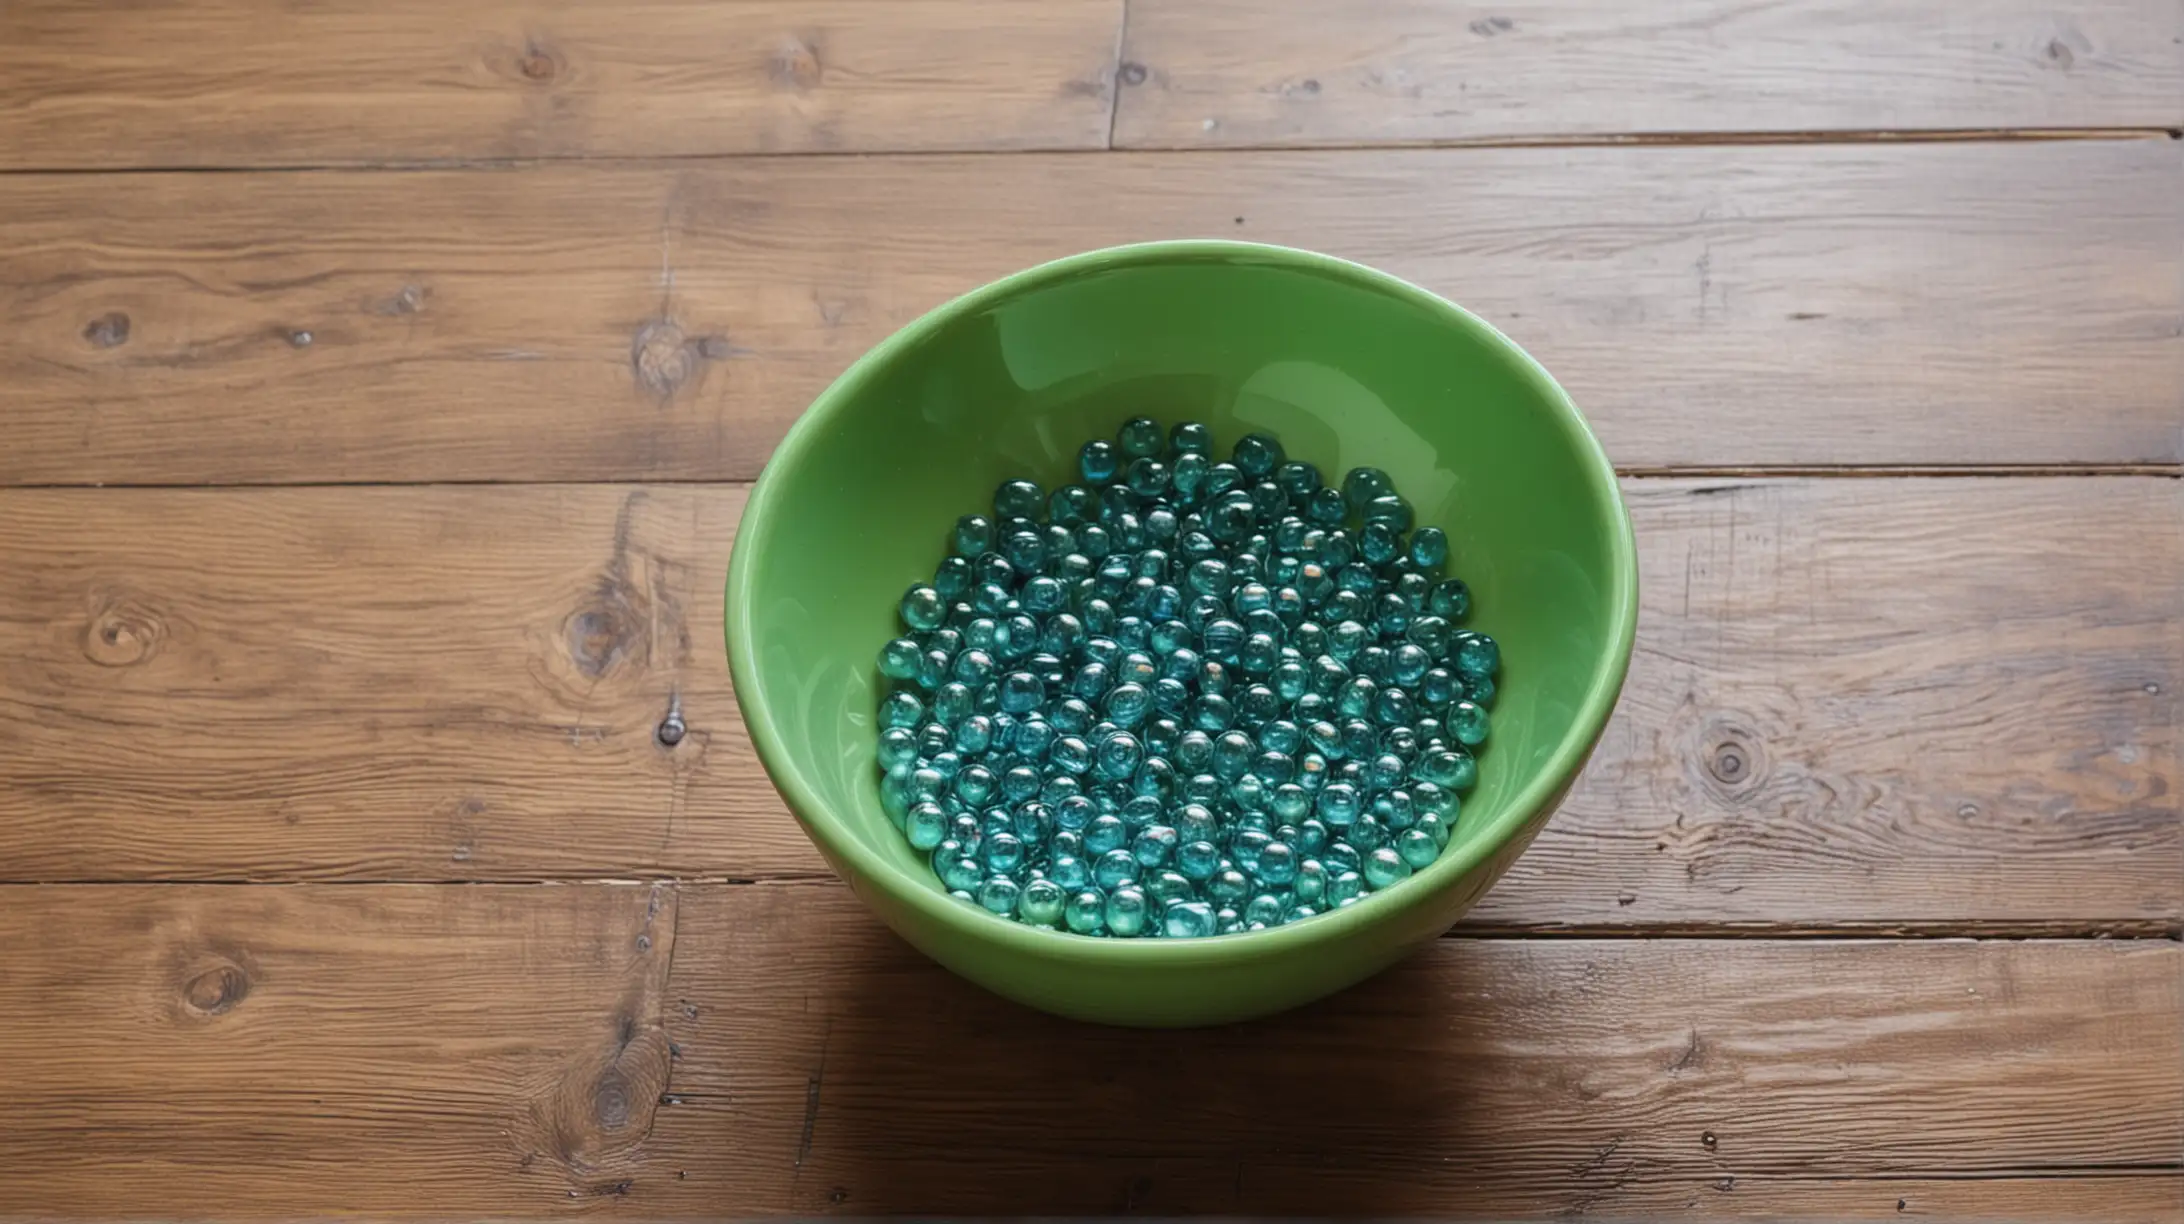 Shiny Green Bowl Filled with Blue Water Beads on Wooden Floor